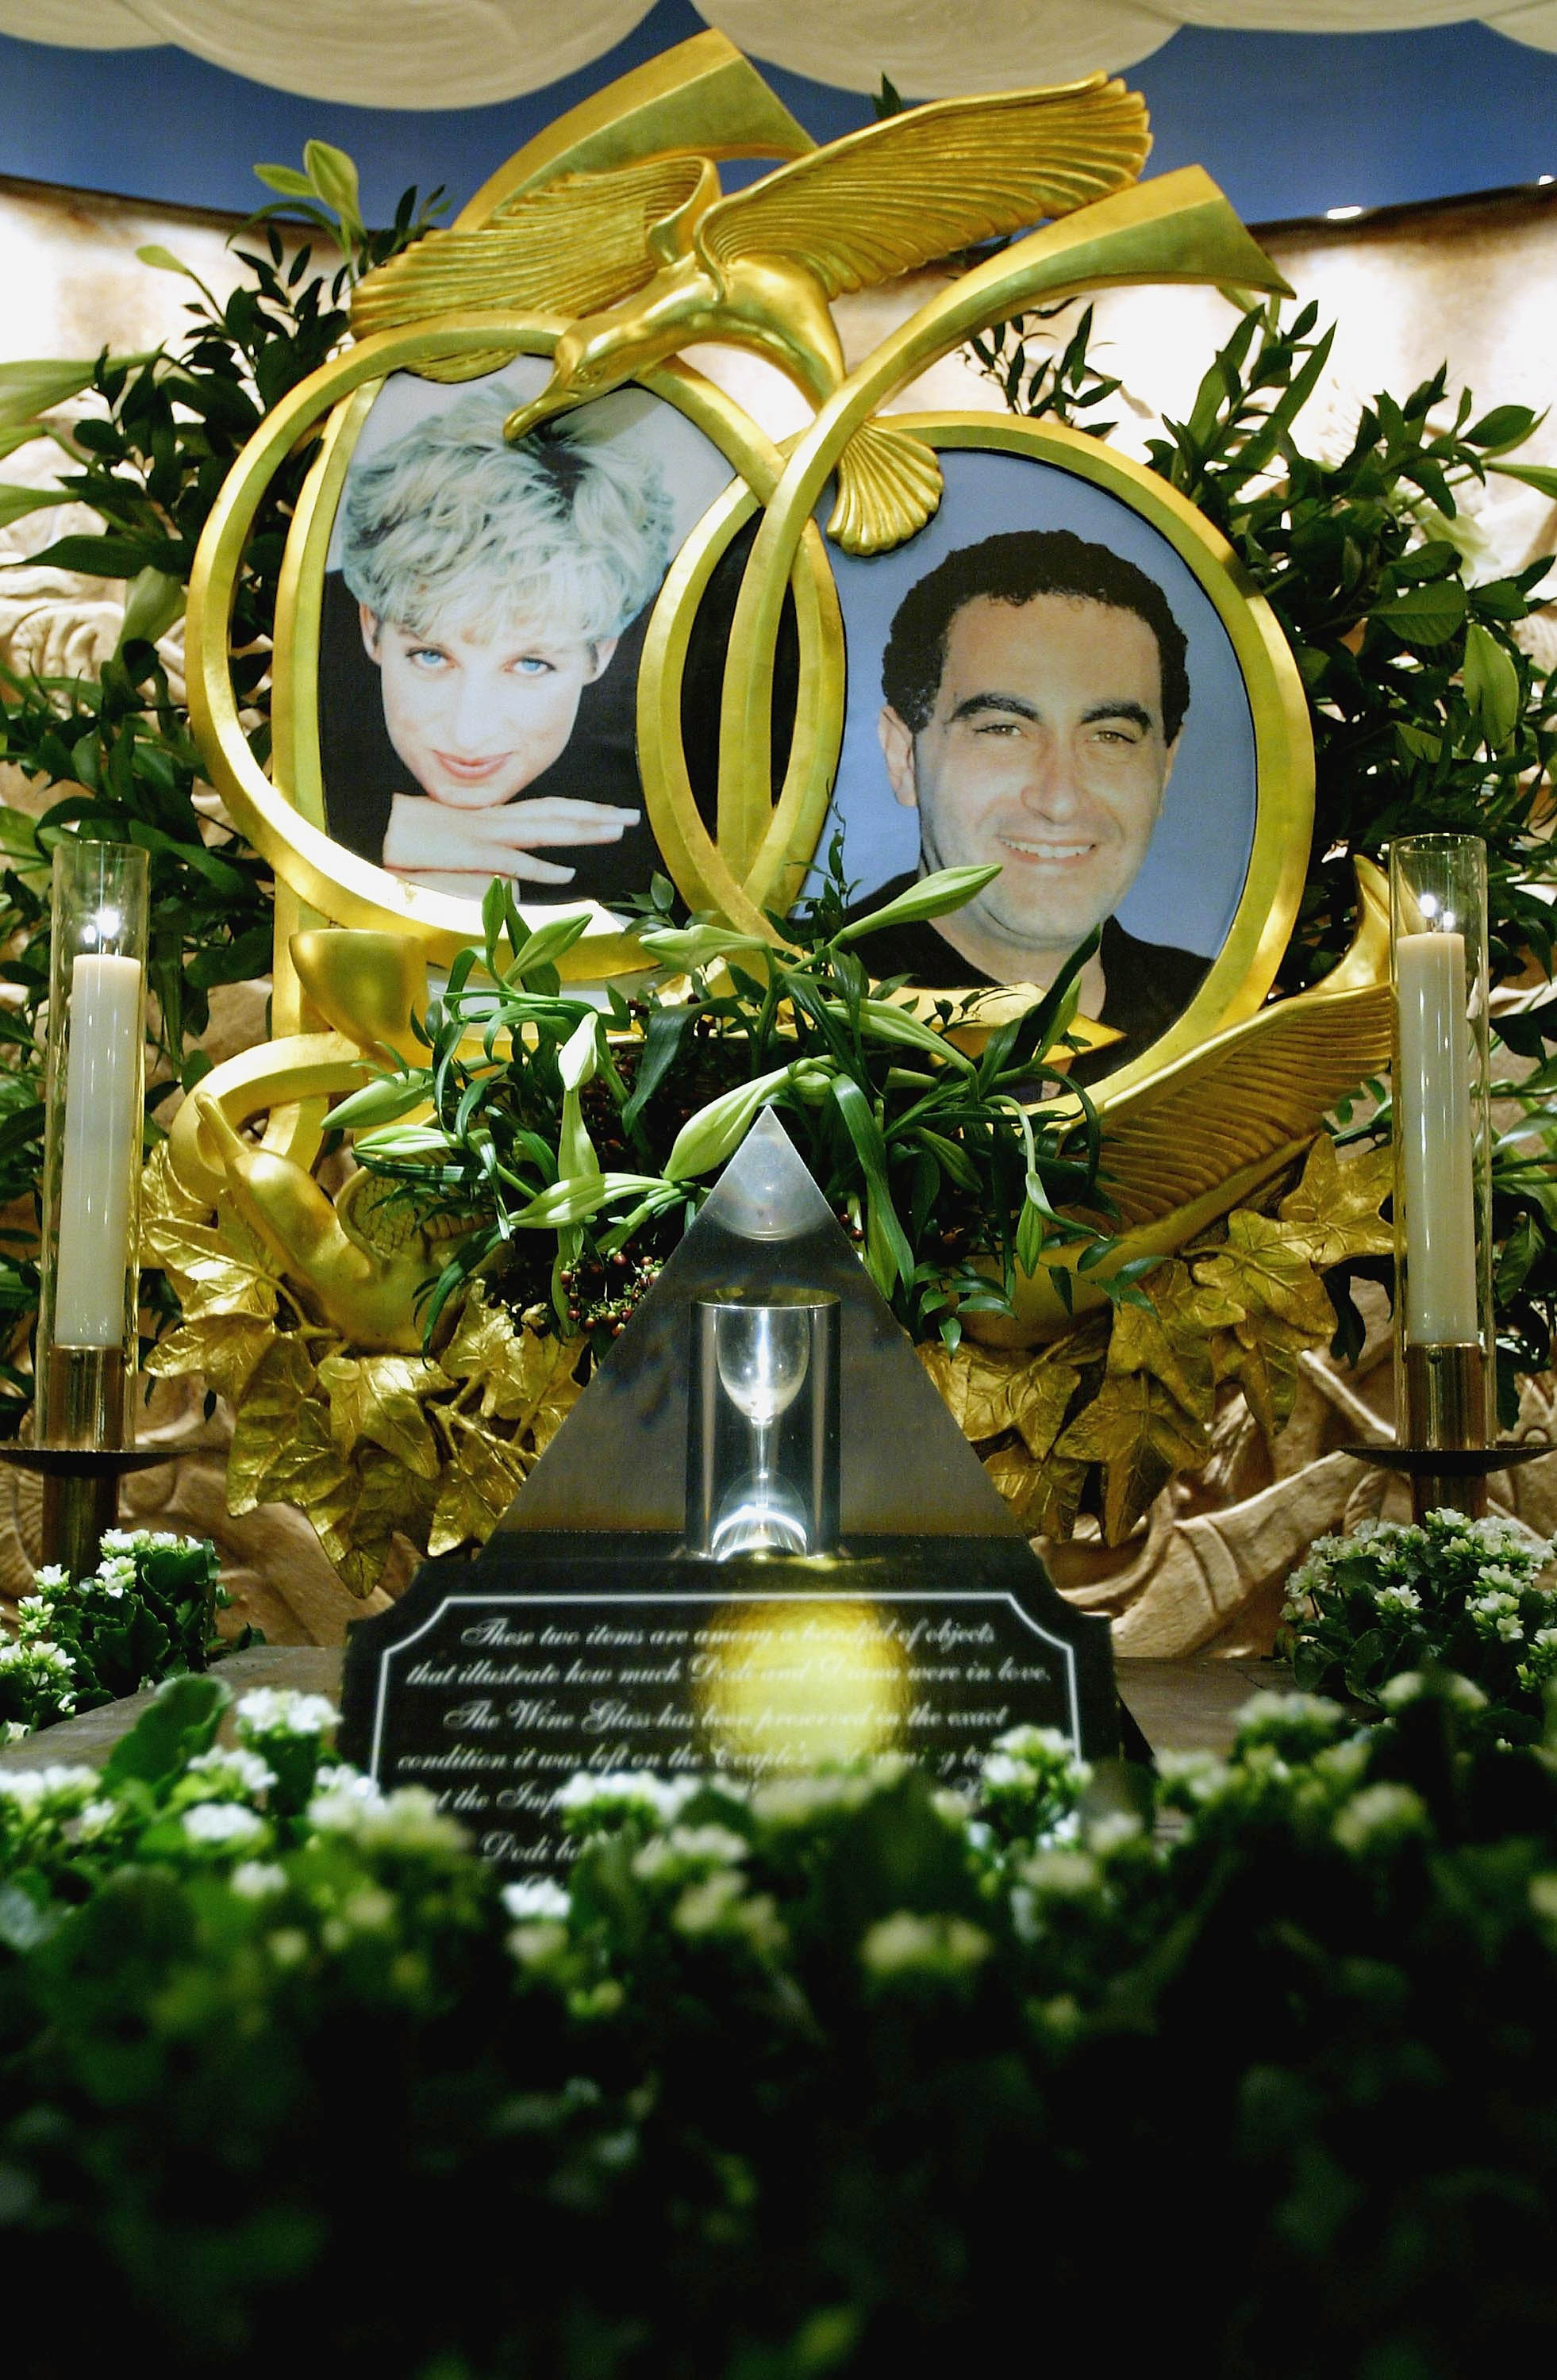 The memorial to Princess Diana and Dodi Fayad is seen in Harrods department store, December 2003